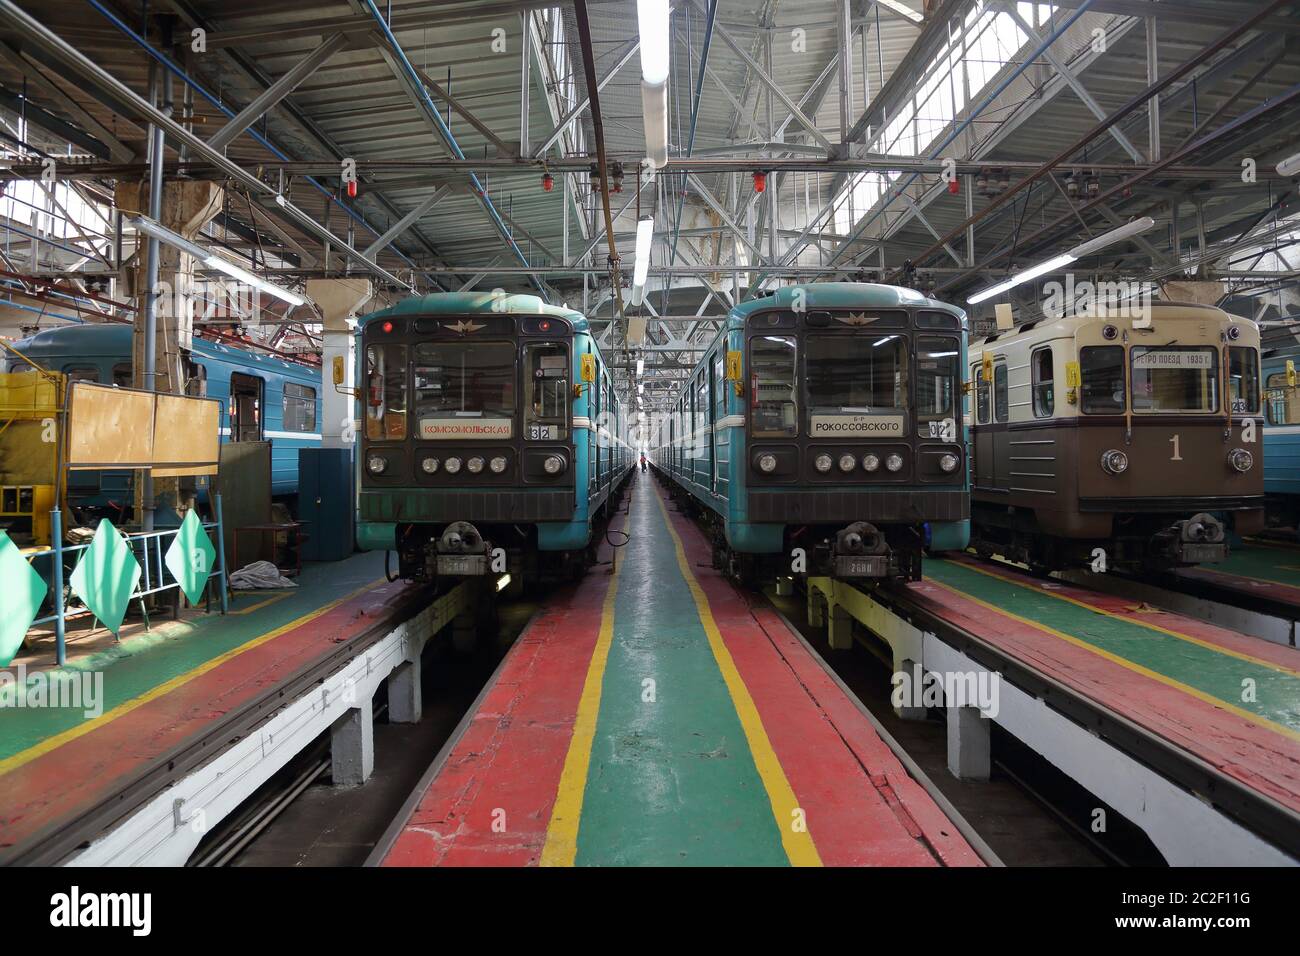 Subway train service depot. Moscow, Russia Stock Photo